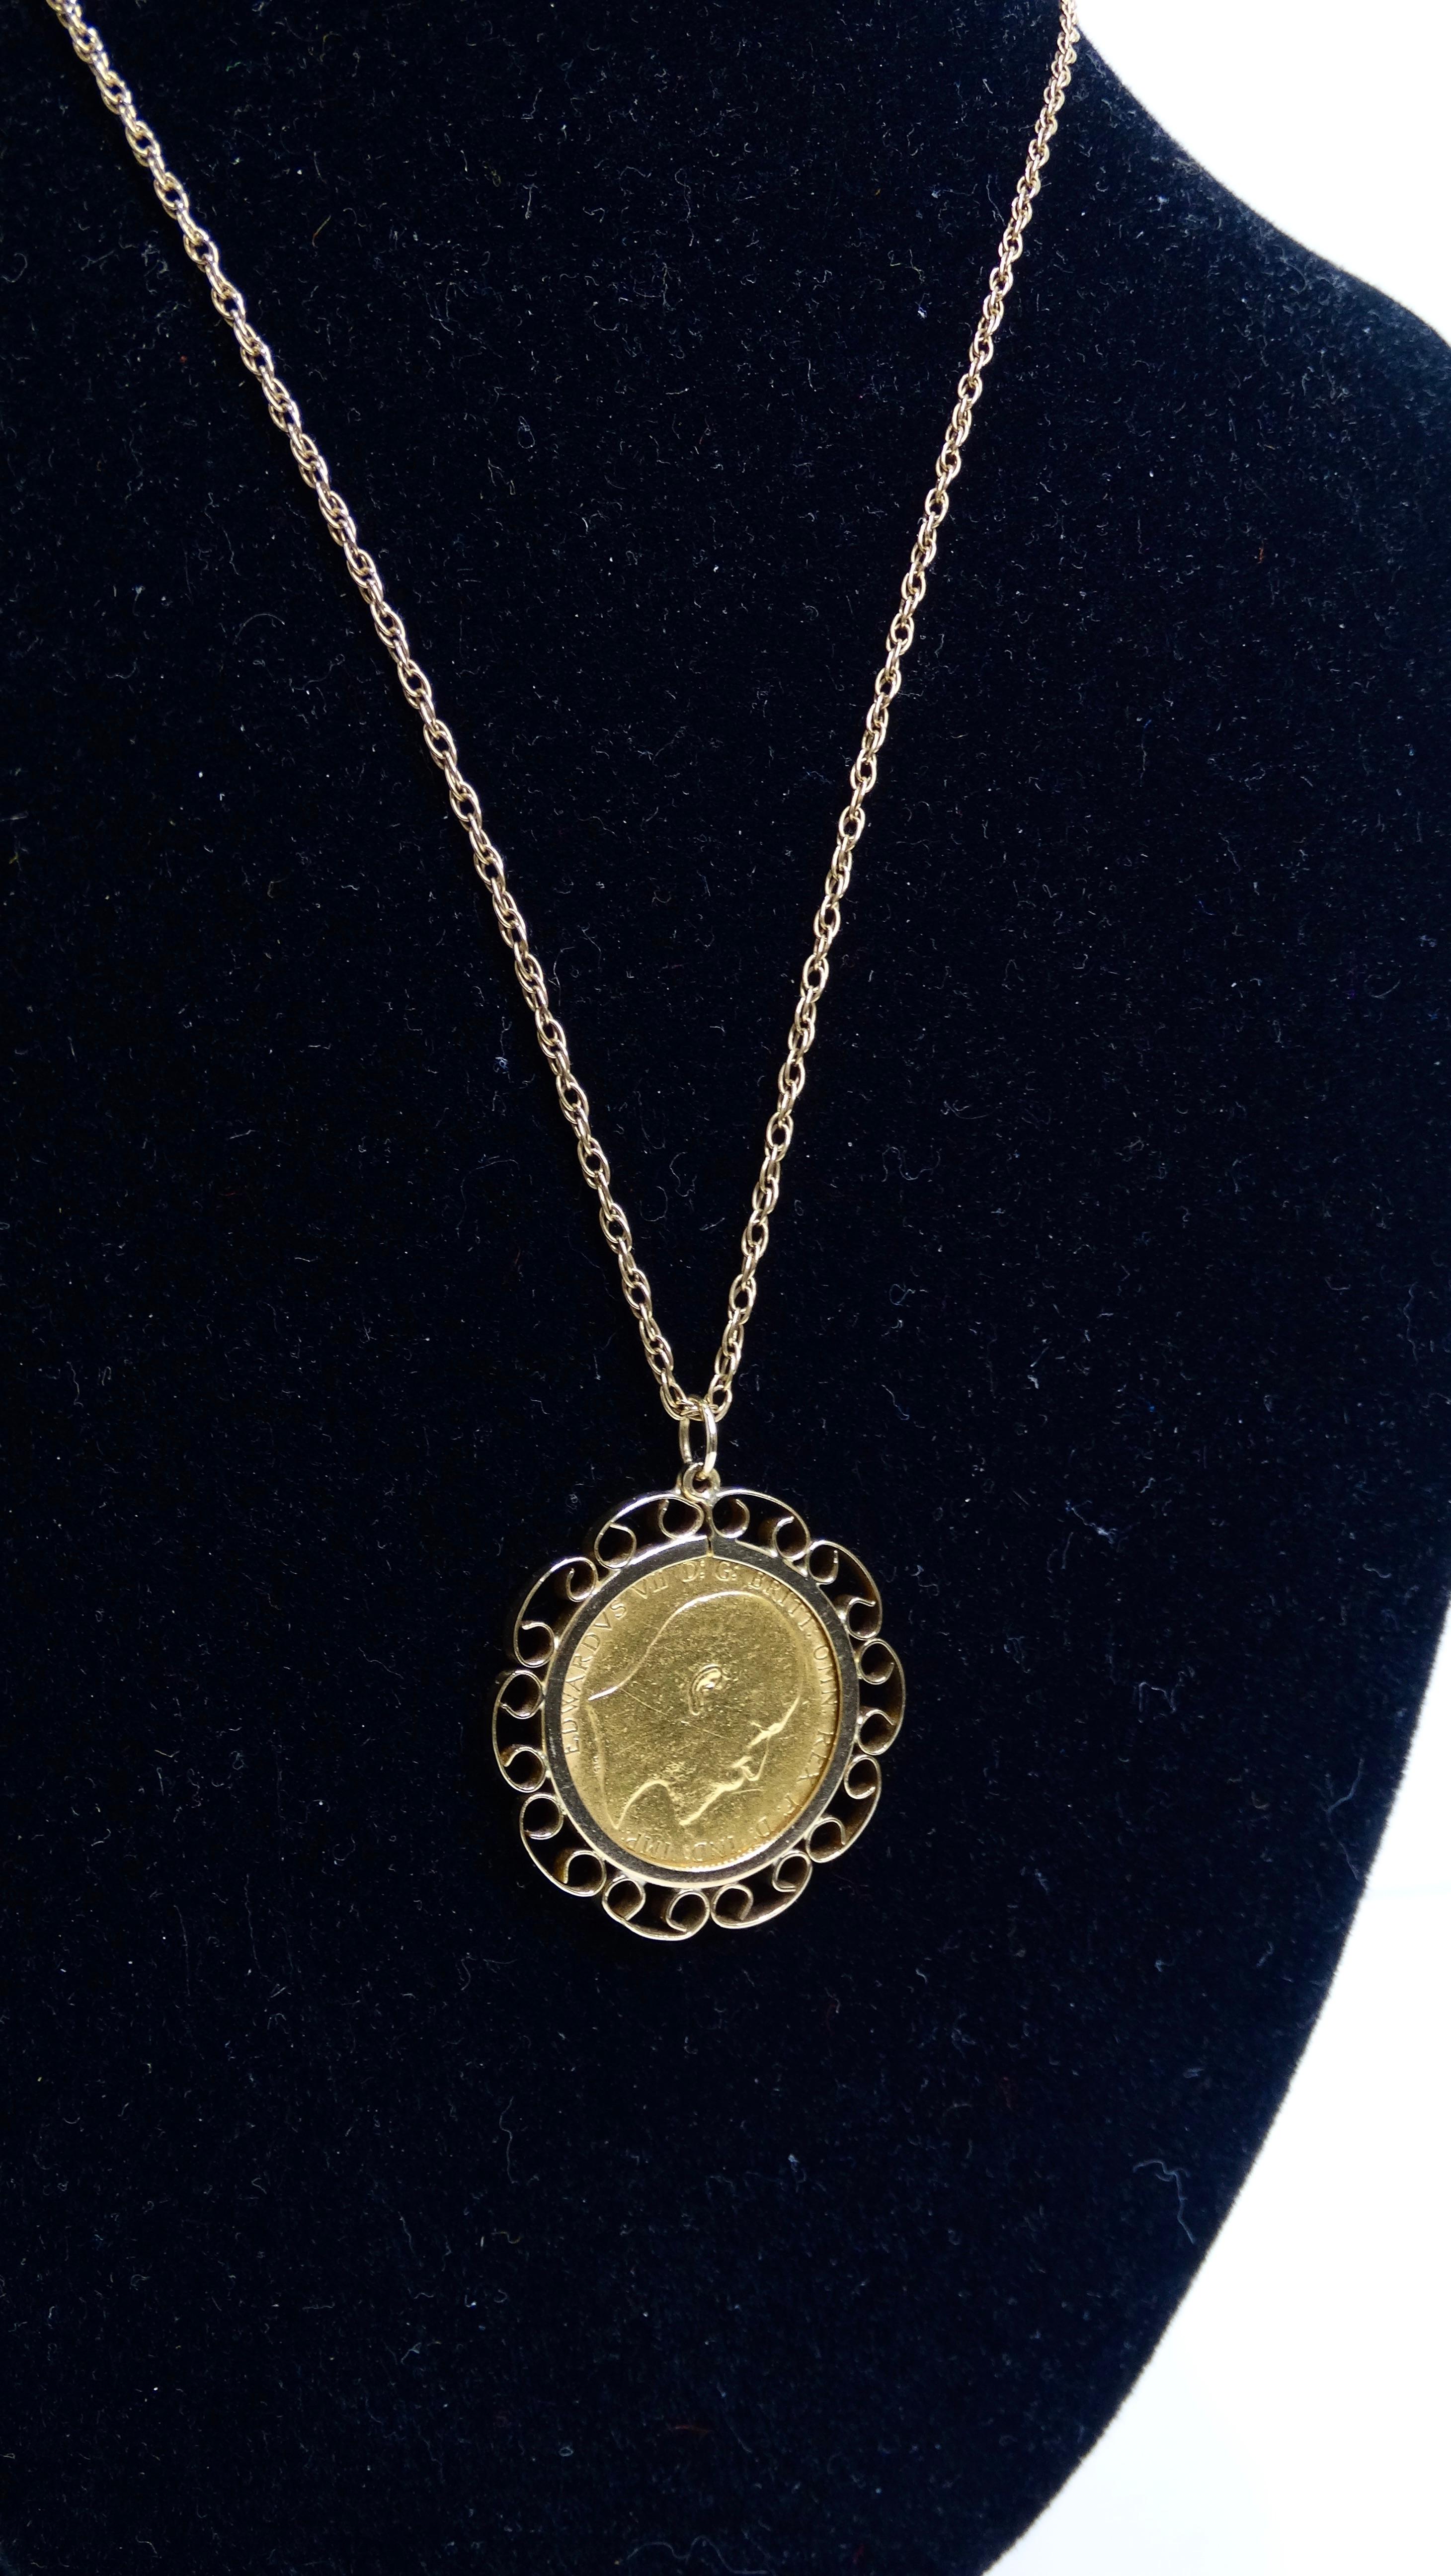 Coin Solid Gold King Edward Vll Necklace In Excellent Condition For Sale In Scottsdale, AZ